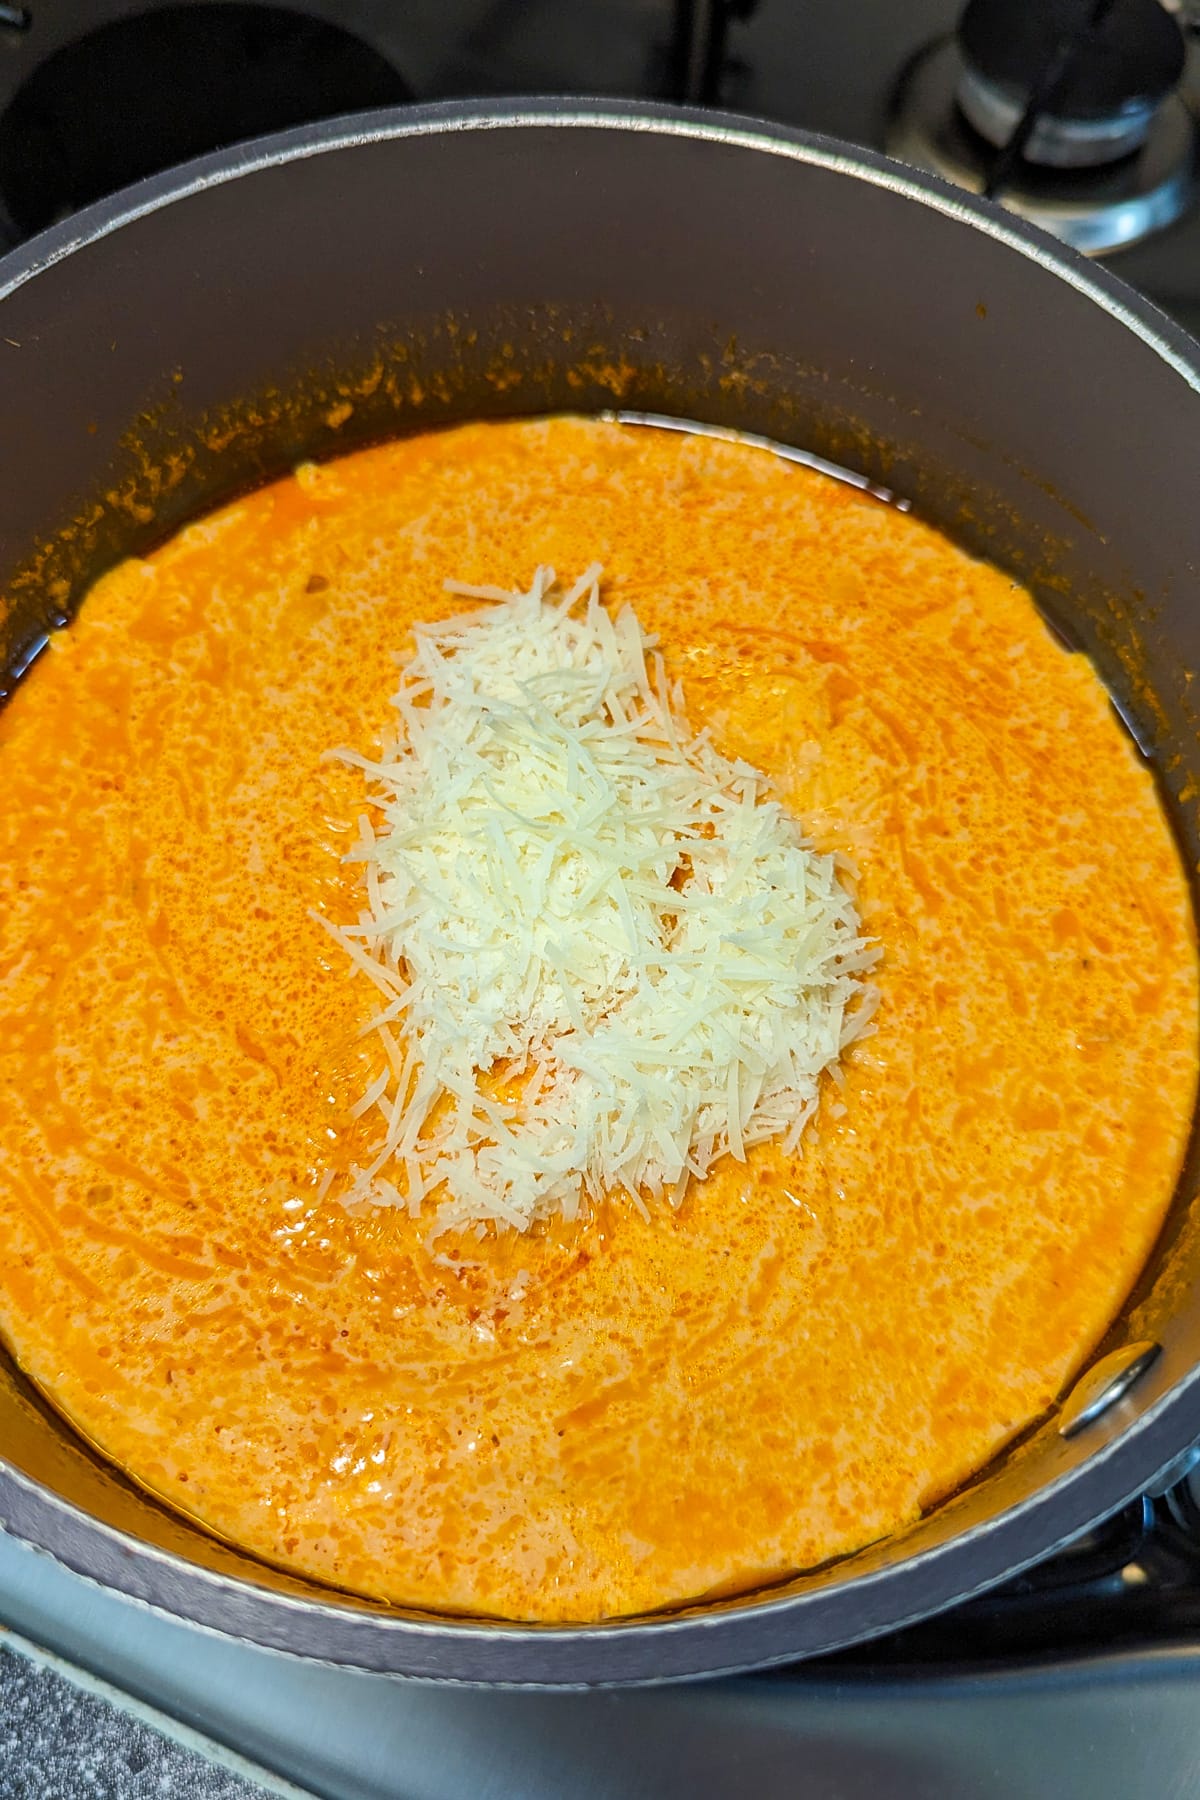 Shredded parmesan over a tomato soup in a pan on the stove.